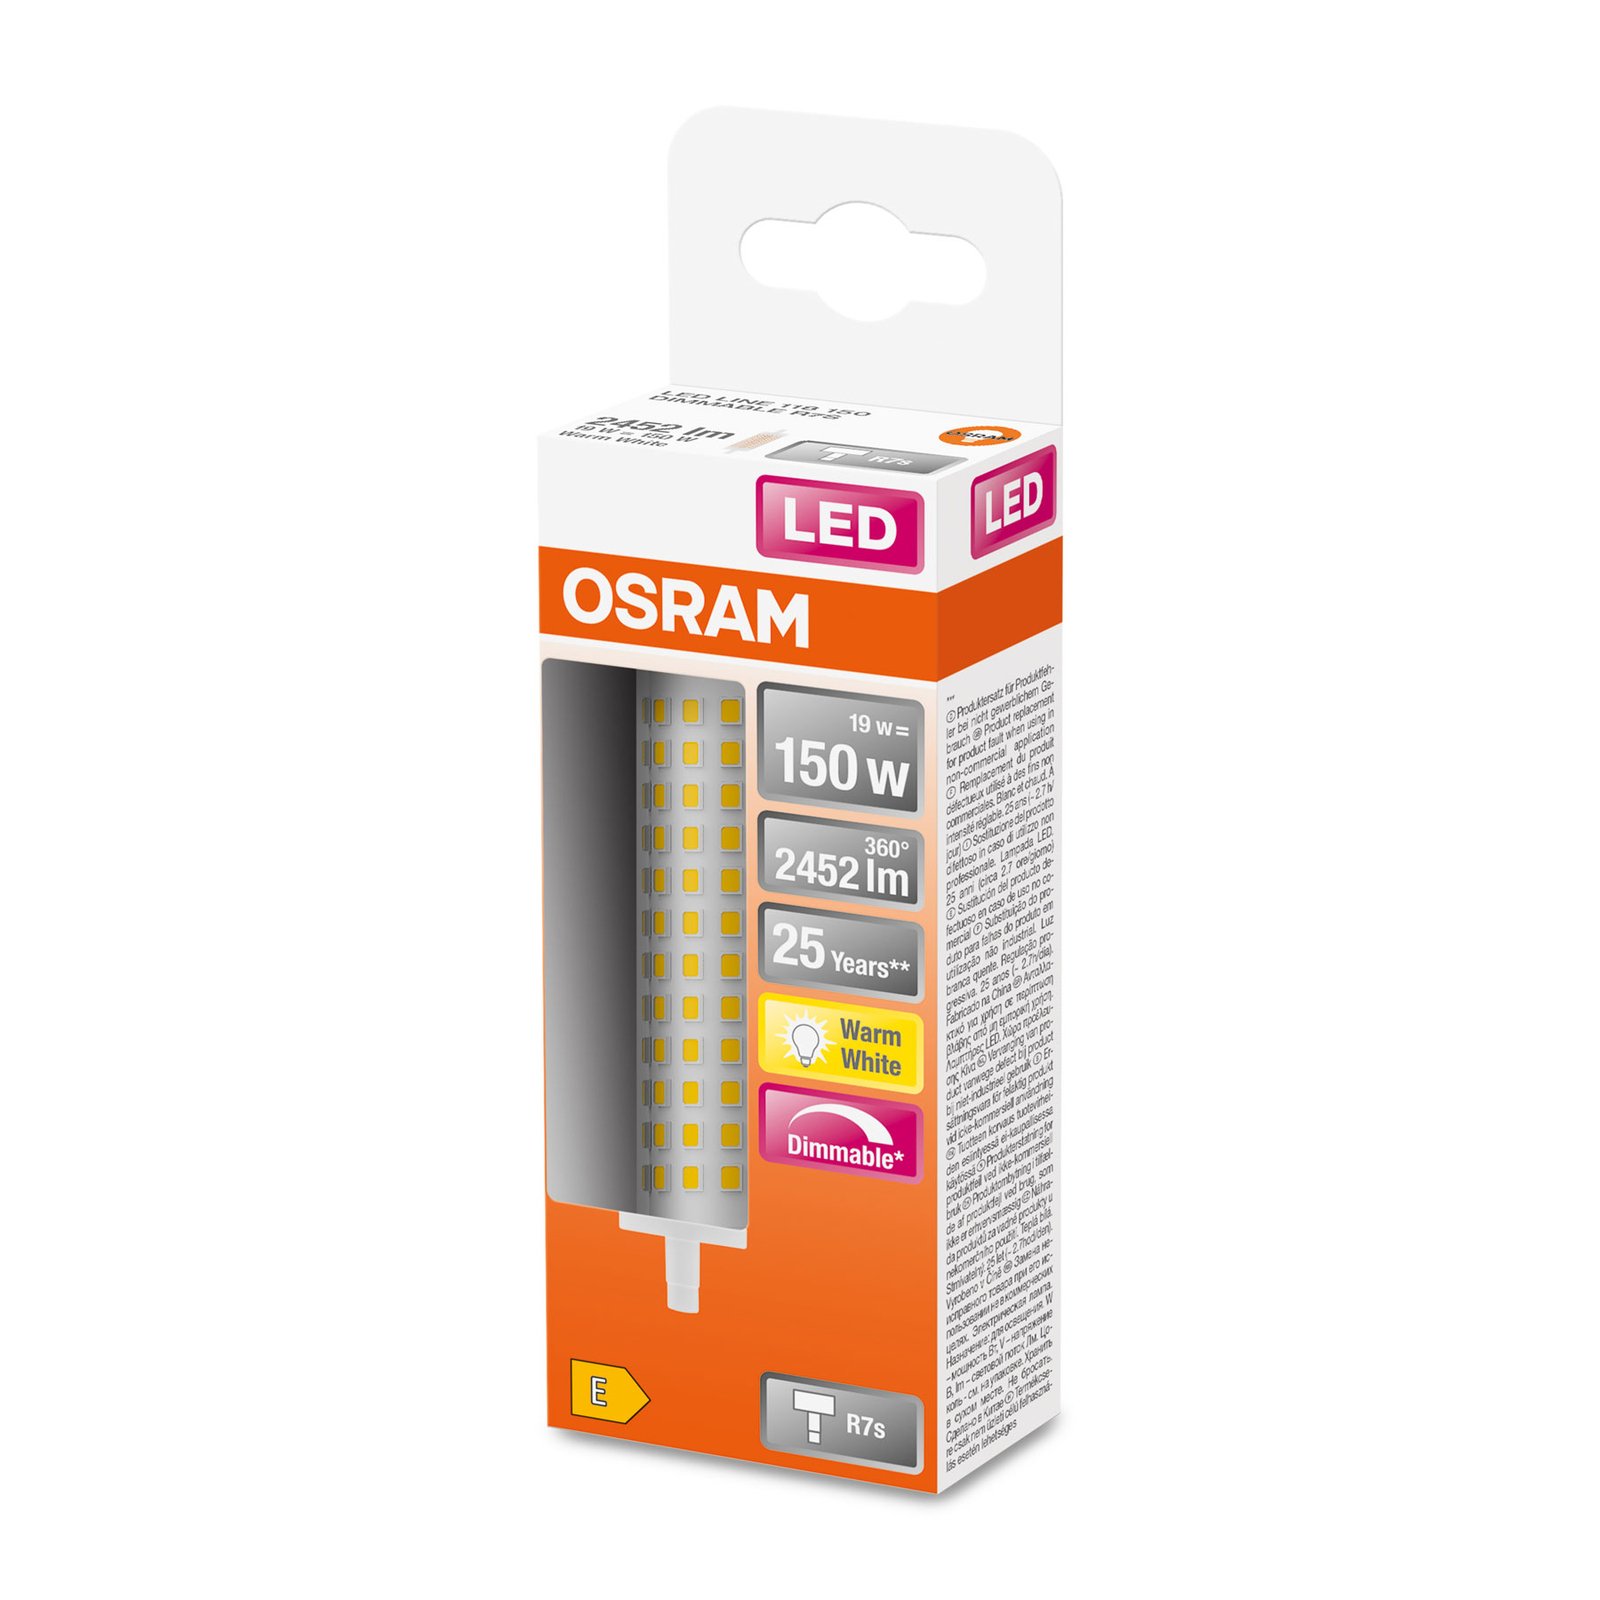 OSRAM LED bulb R7s 19W 2700K, dimmable